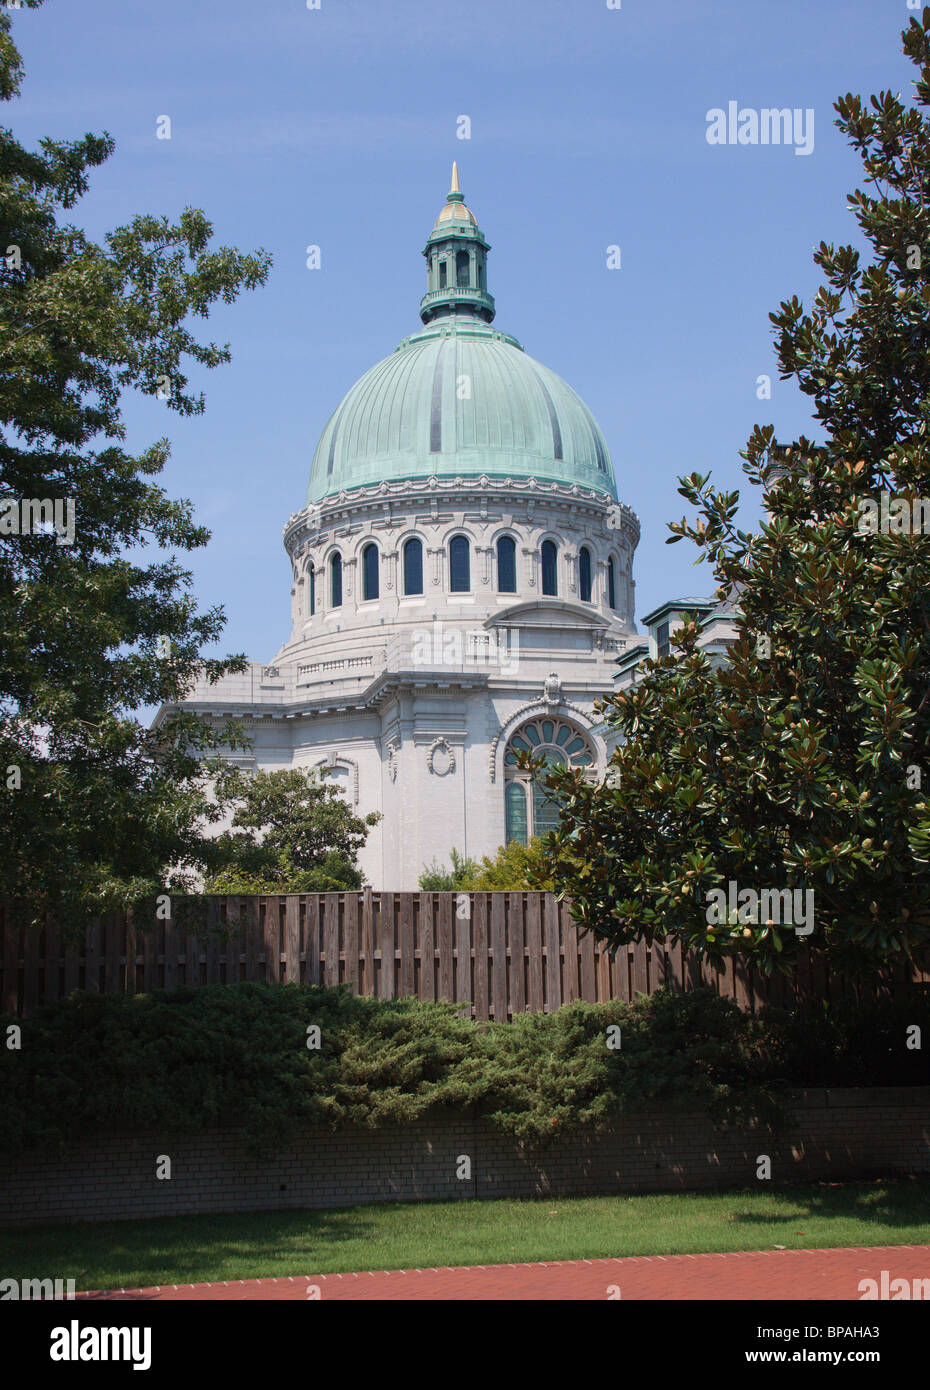 US Naval Academy Chapelle, Annapolis, Maryland, USA Banque D'Images